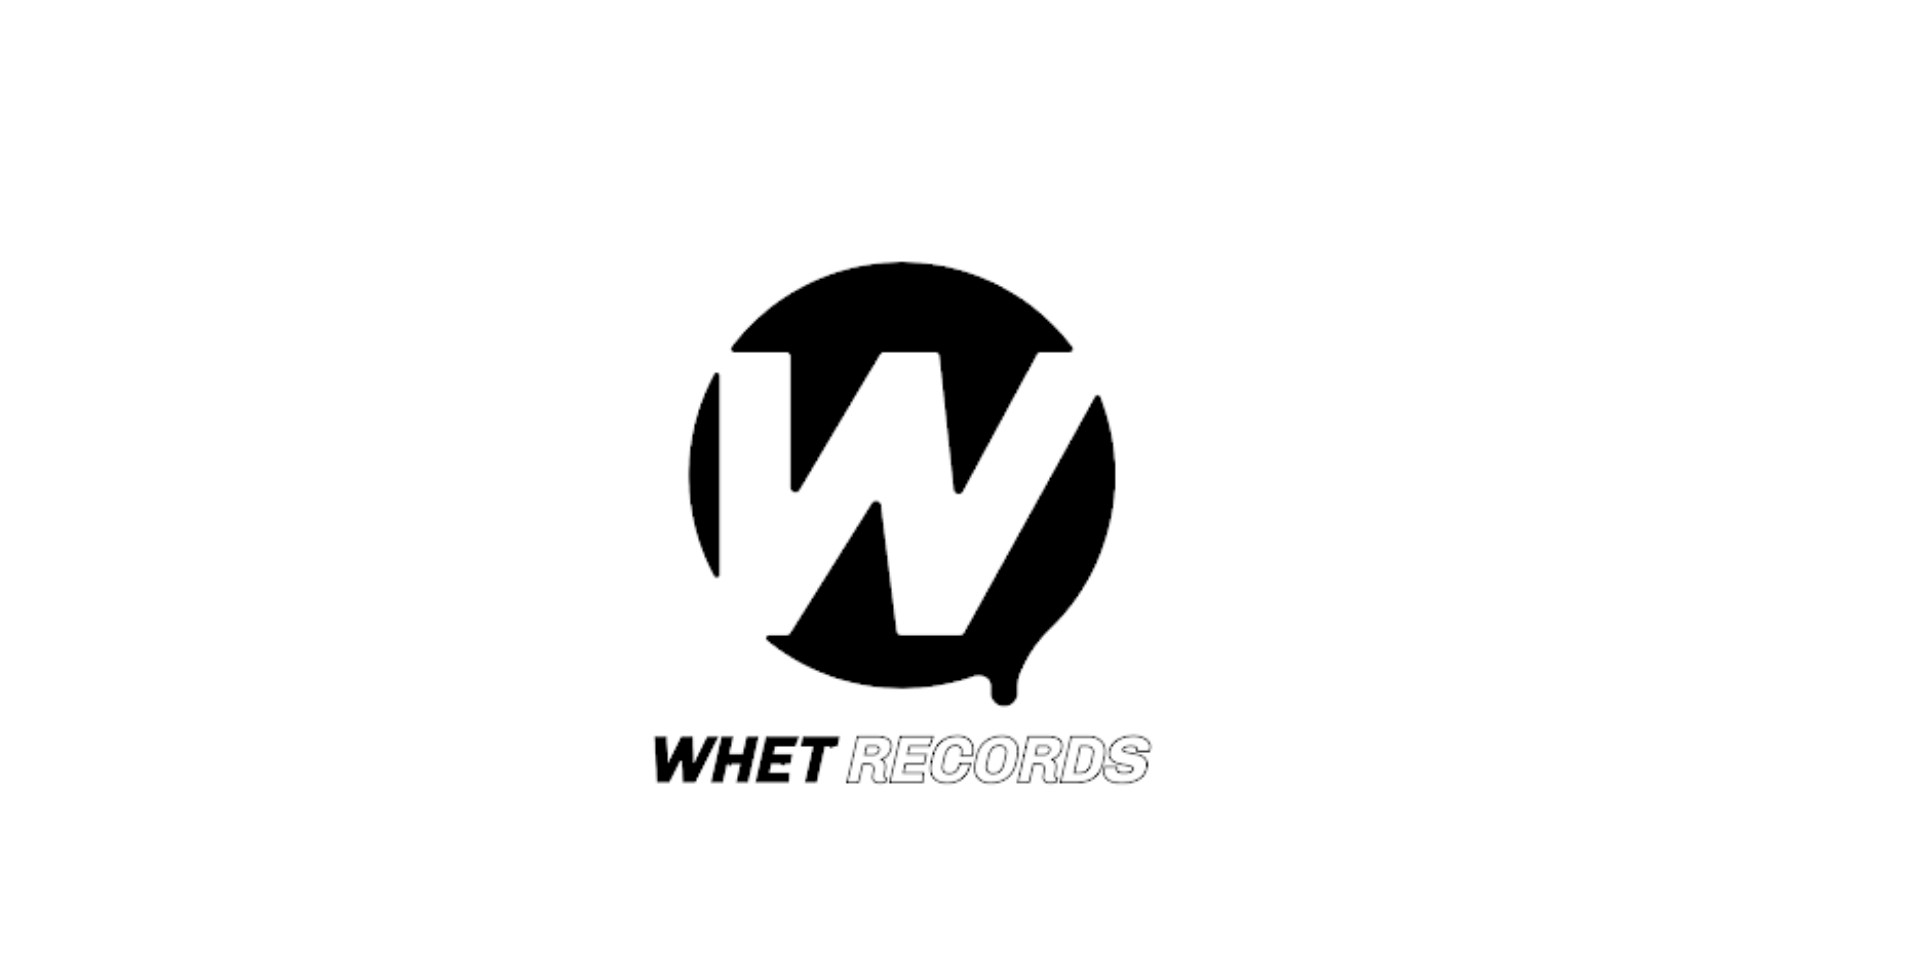 Warner Music Asia's Whet Records expands roster with 22Bullets, Gigi Lee, Yuen Yuen, and more 